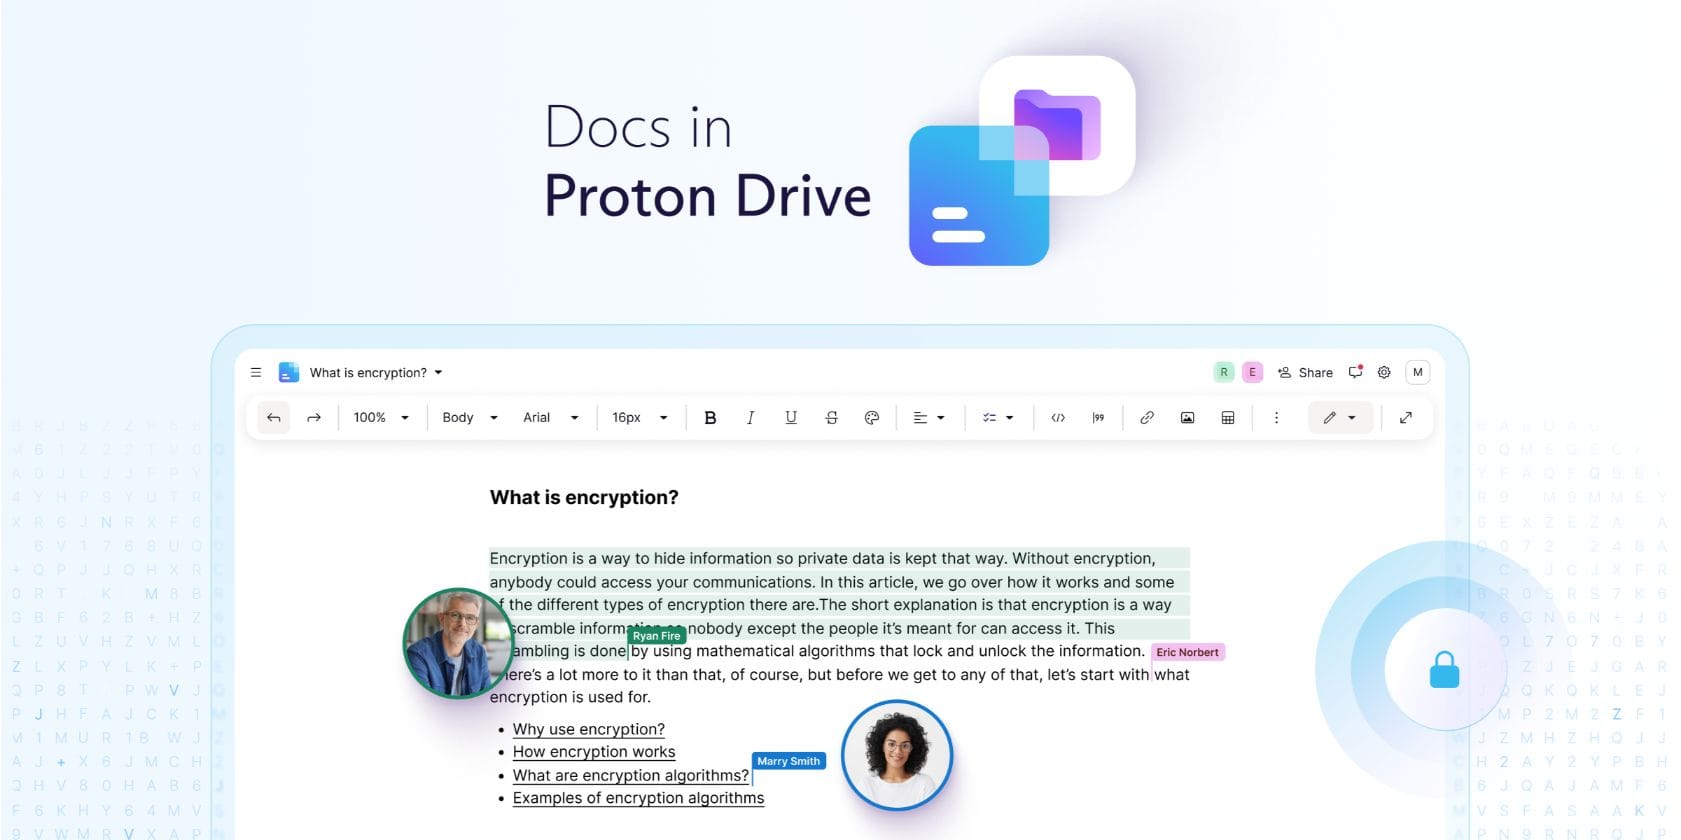 an illustration showing the docs in proton drive interface with collaboration tools in action